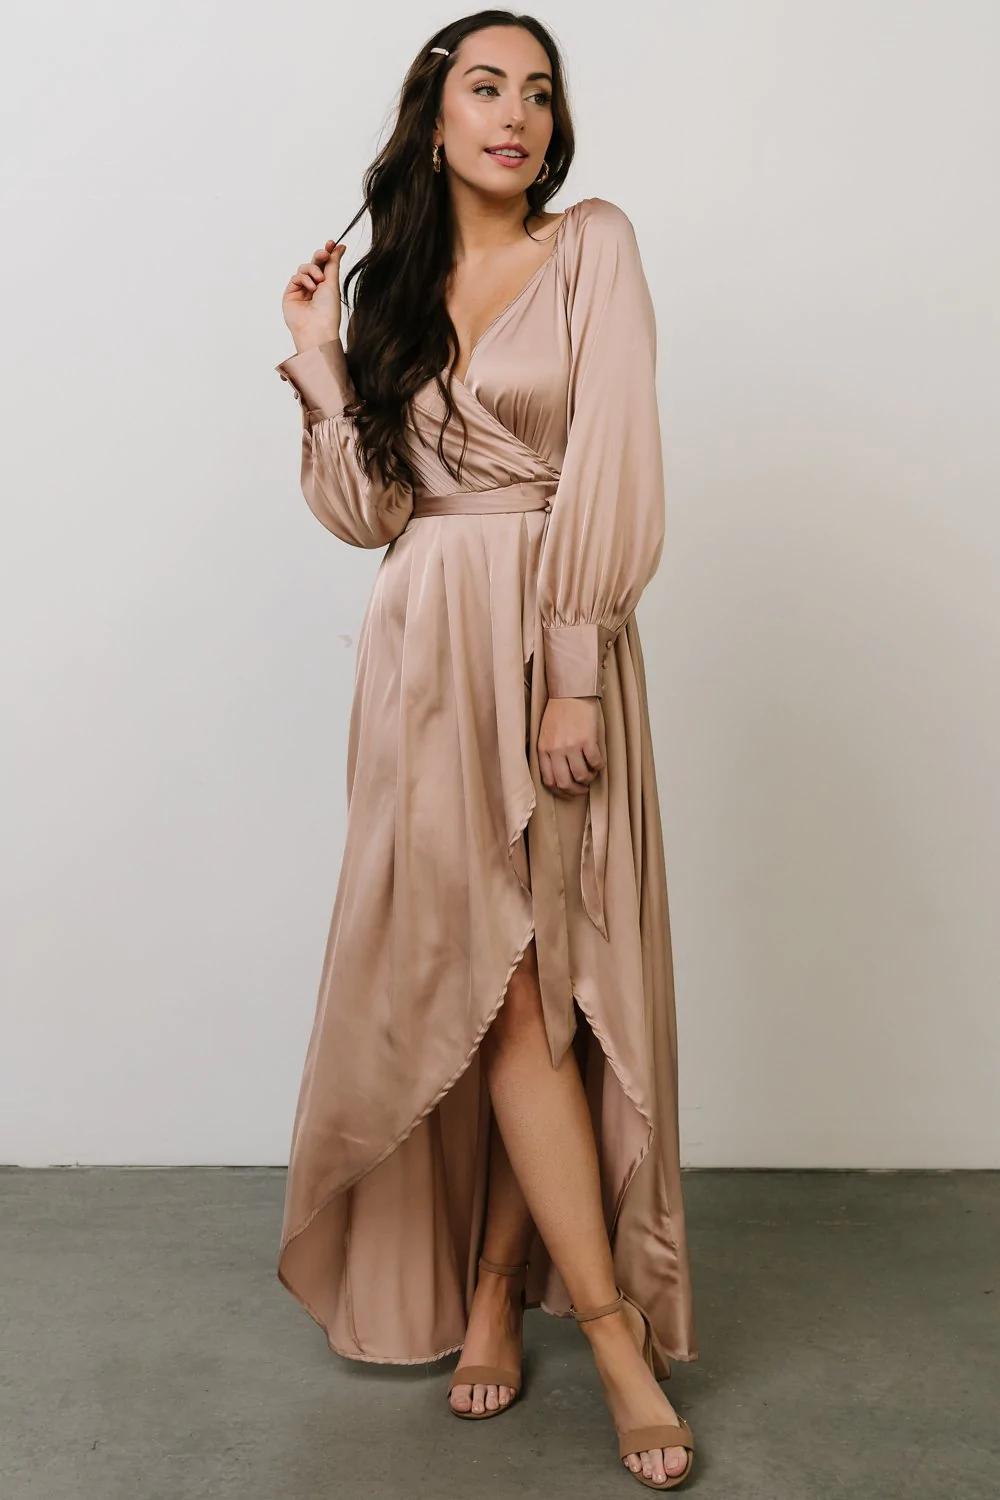 champagne satin bridesmaid dress with long sleeves